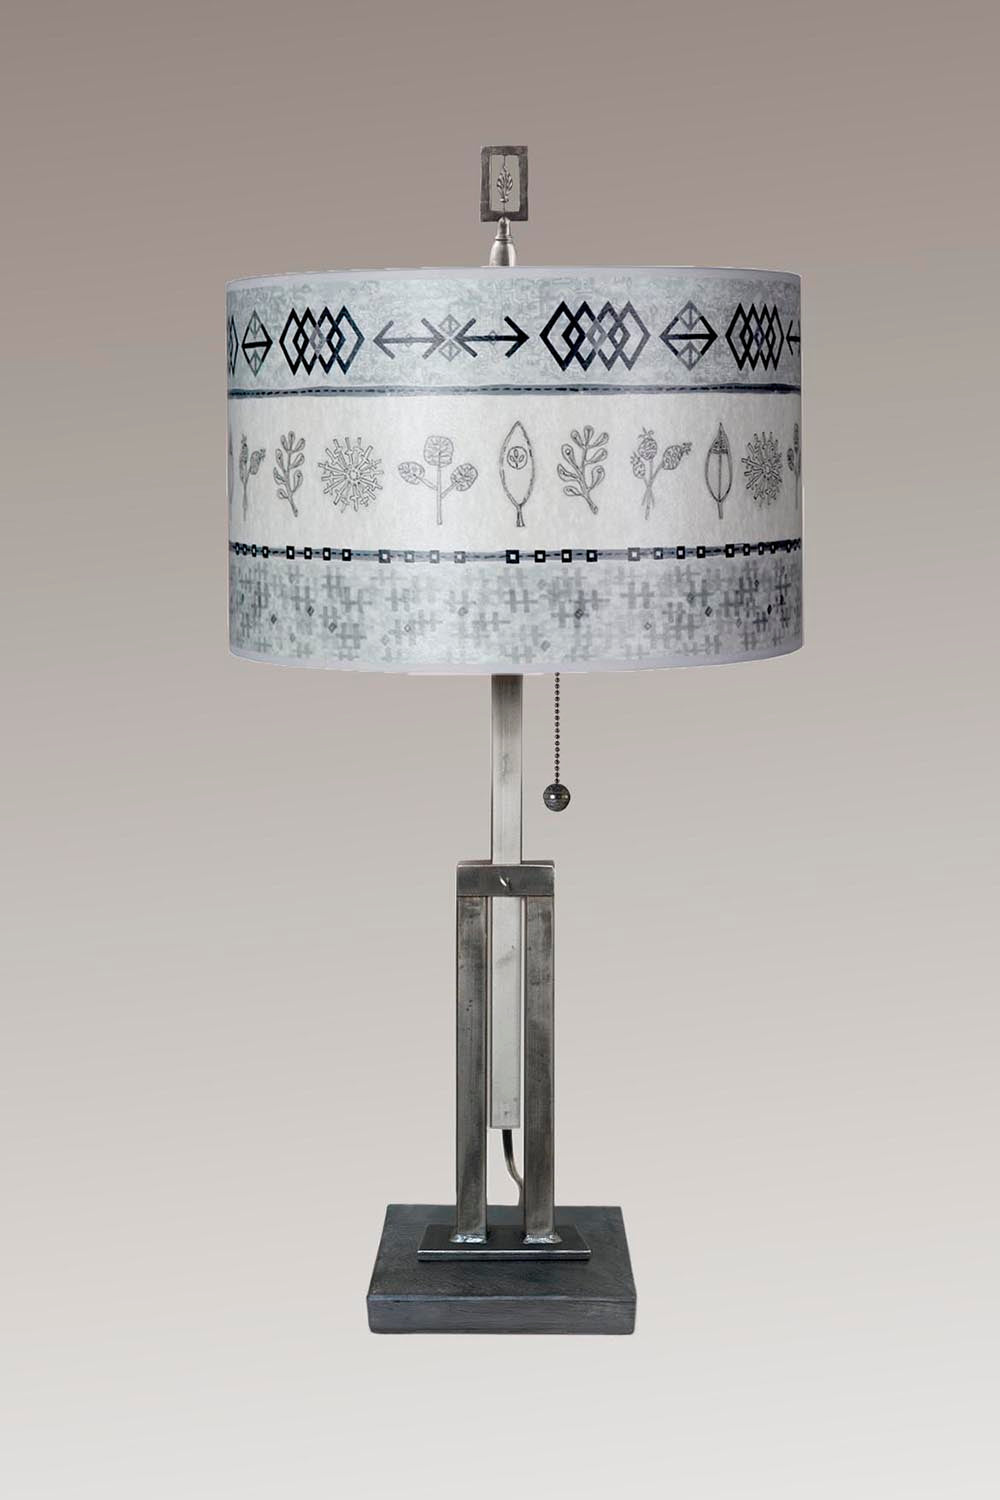 Janna Ugone &amp; Co Table Lamps Adjustable-Height Steel Table Lamp with Large Drum Shade in Wovens &amp; Spring in Mist